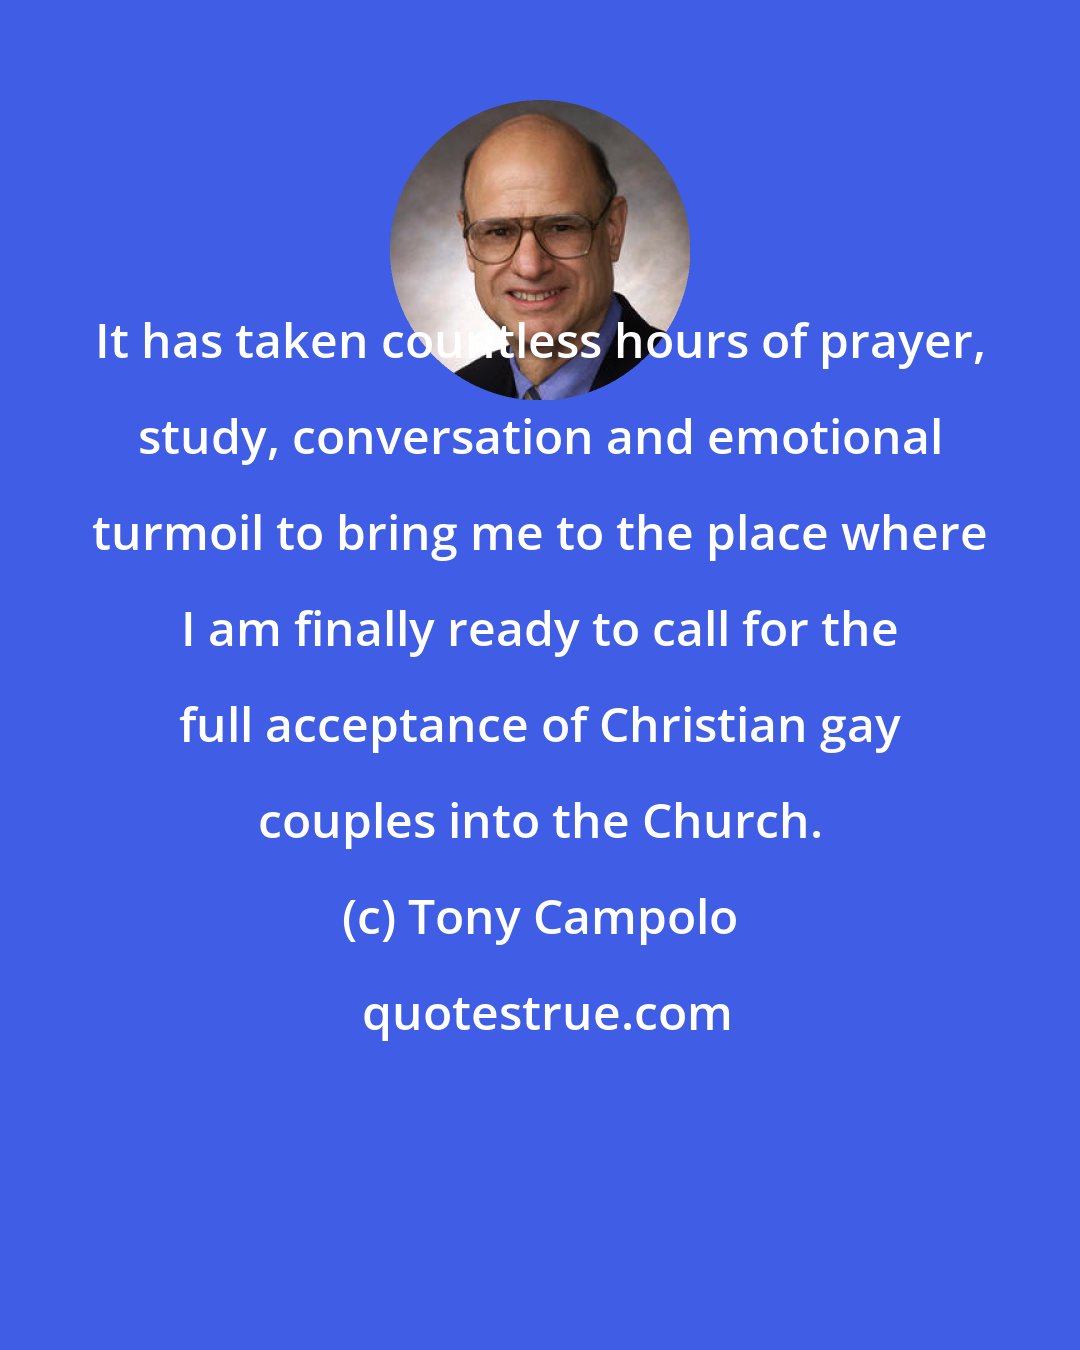 Tony Campolo: It has taken countless hours of prayer, study, conversation and emotional turmoil to bring me to the place where I am finally ready to call for the full acceptance of Christian gay couples into the Church.